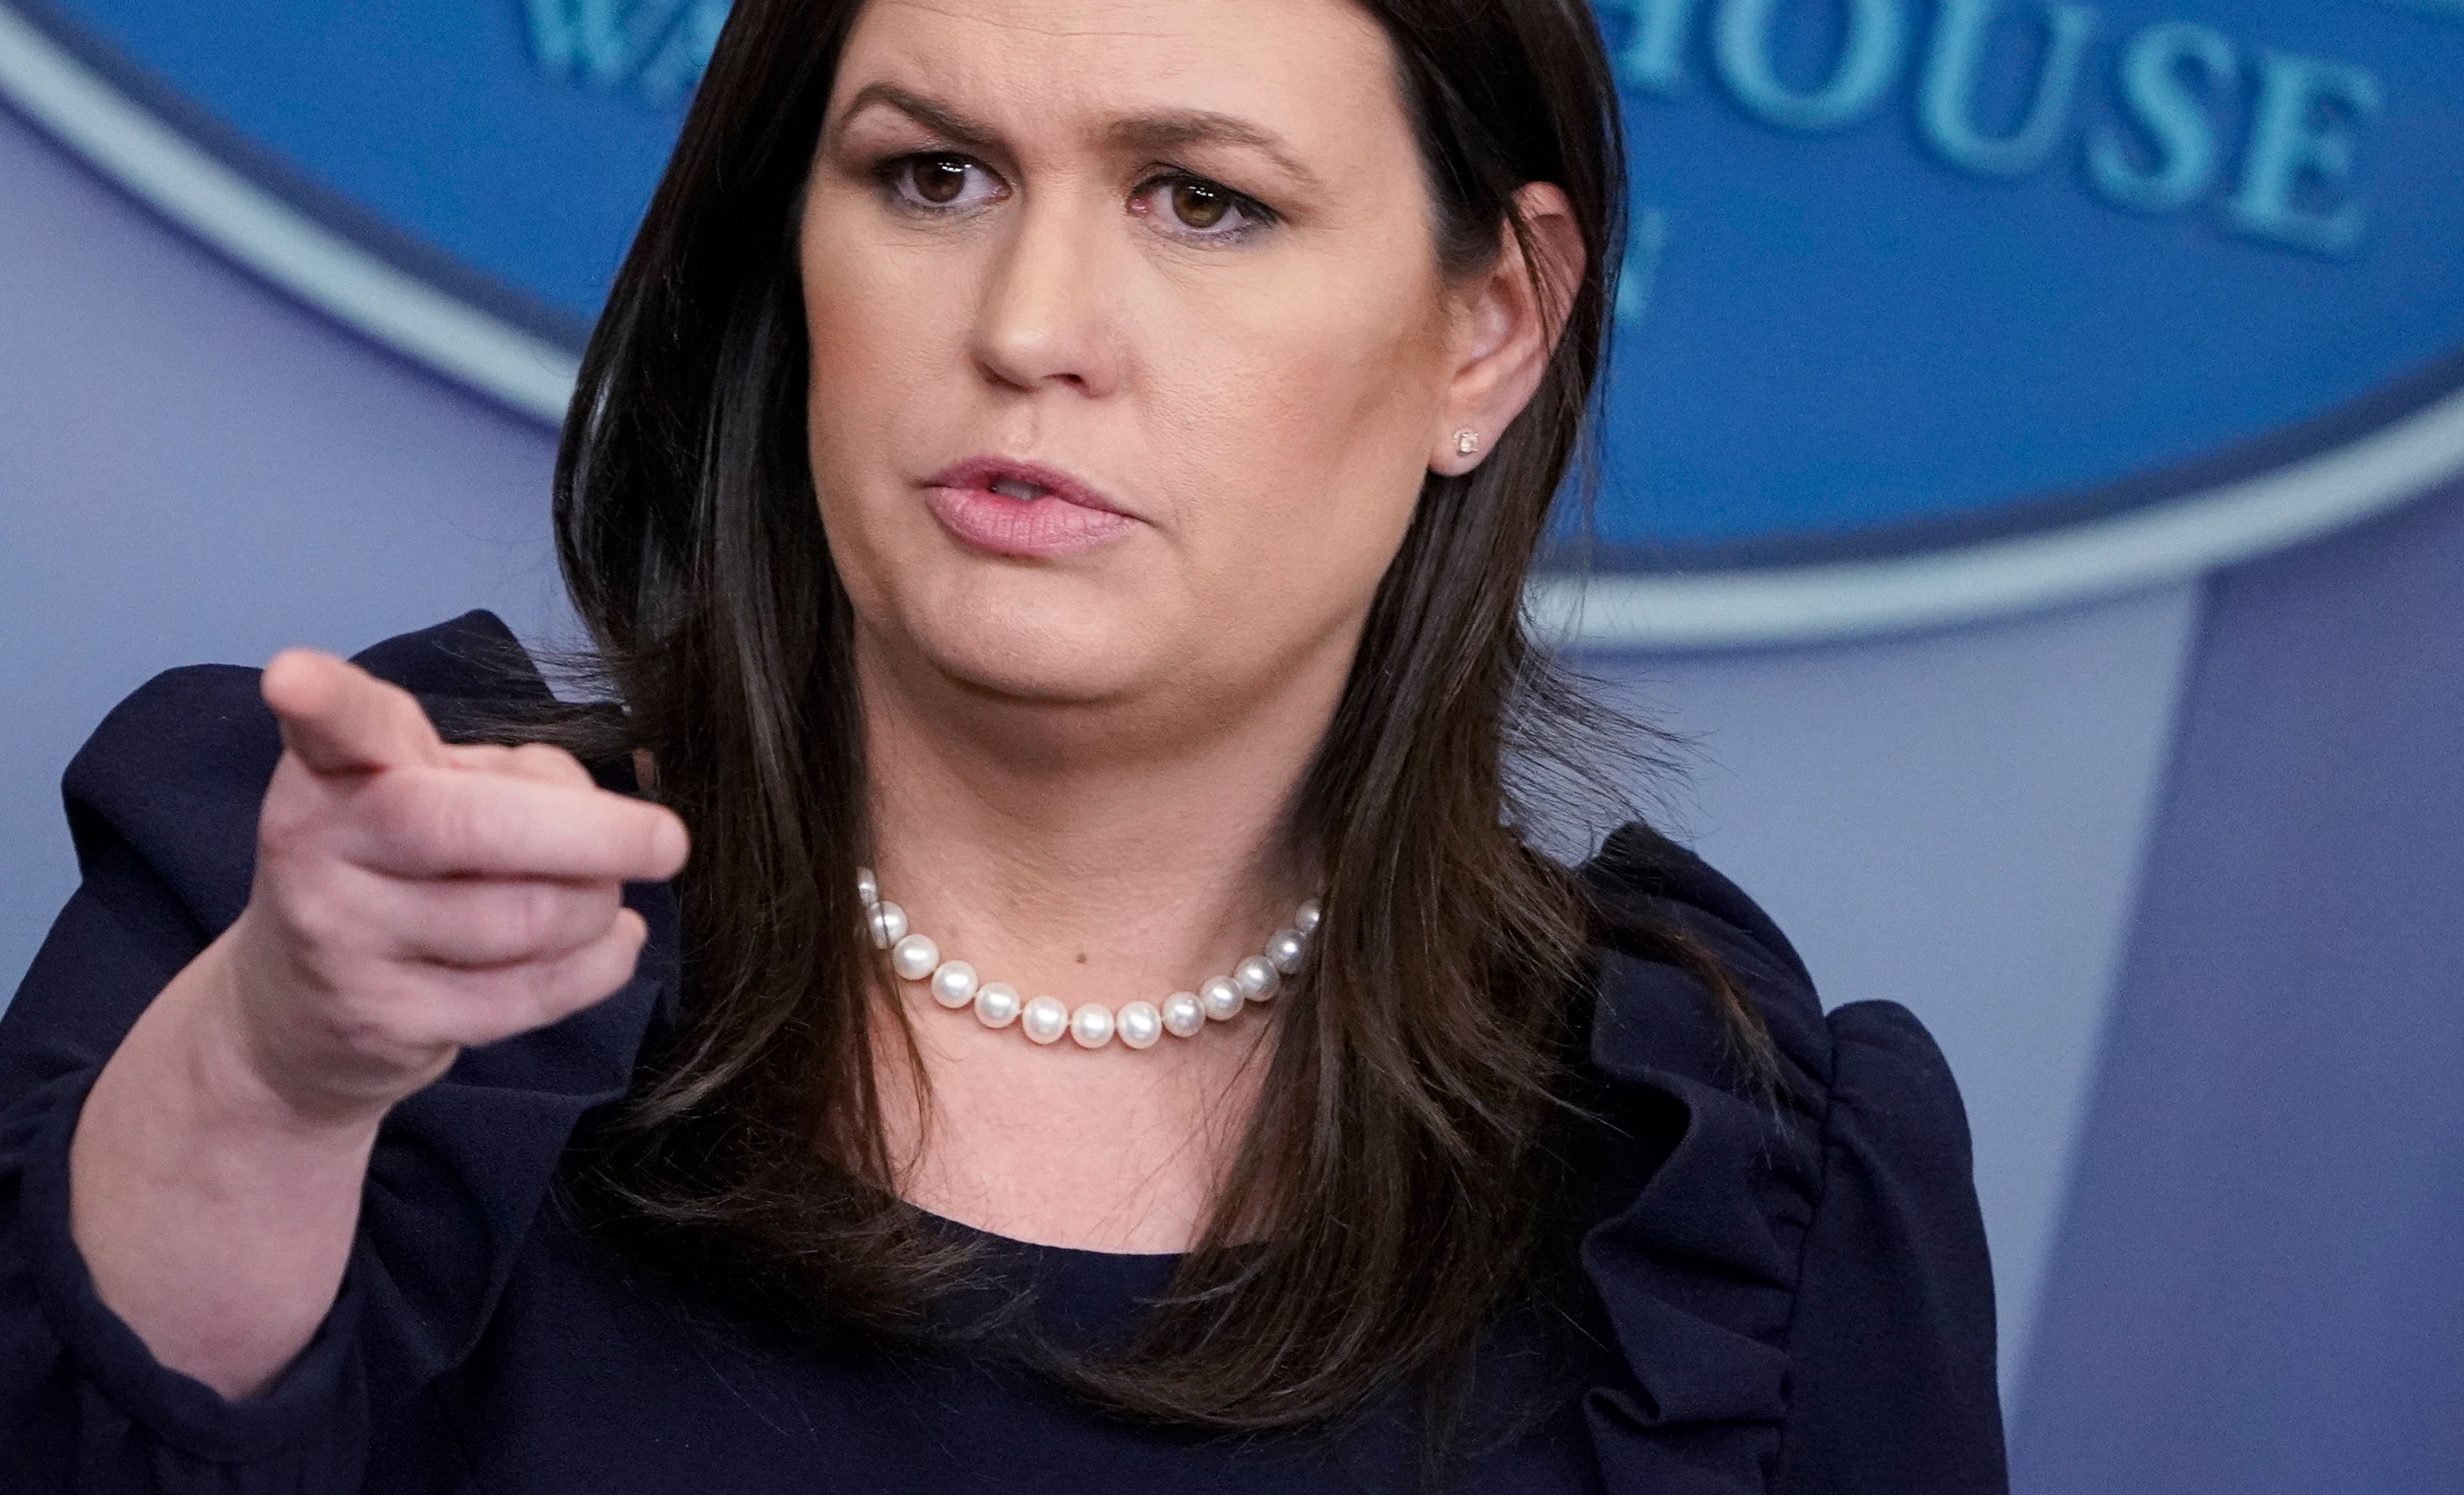 White House Press Secretary Sarah Sanders speaks during the daily briefing in the Brady Briefing Room of the White House on February 12, 2018 in (Washington, DC. / AFP PHOTO / MANDEL NGAN)